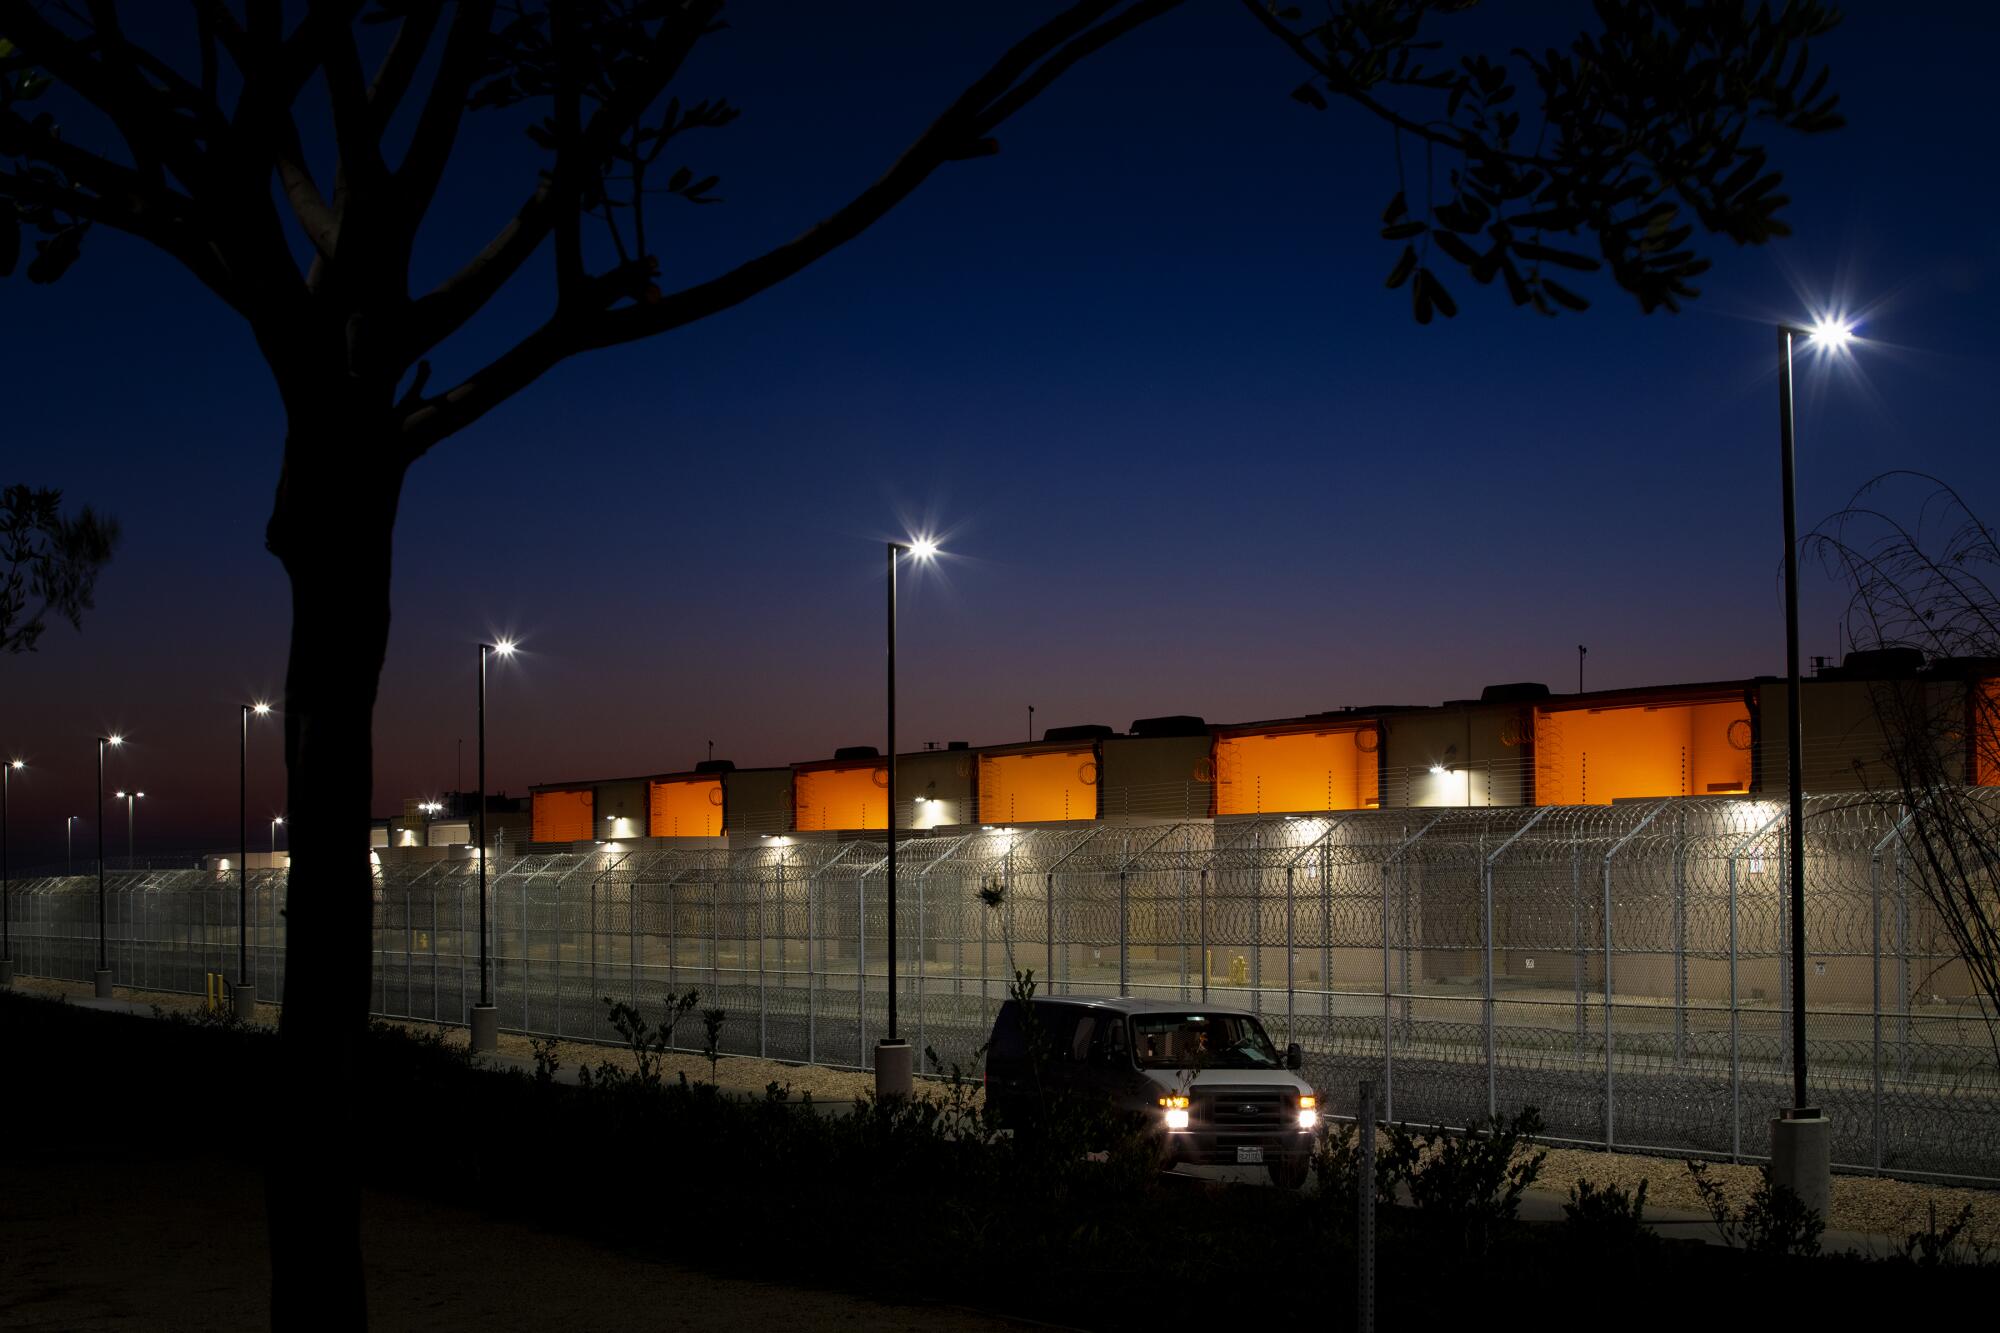 Otay Mesa Detention Center's fencing and the side of the building are brightly lit at night